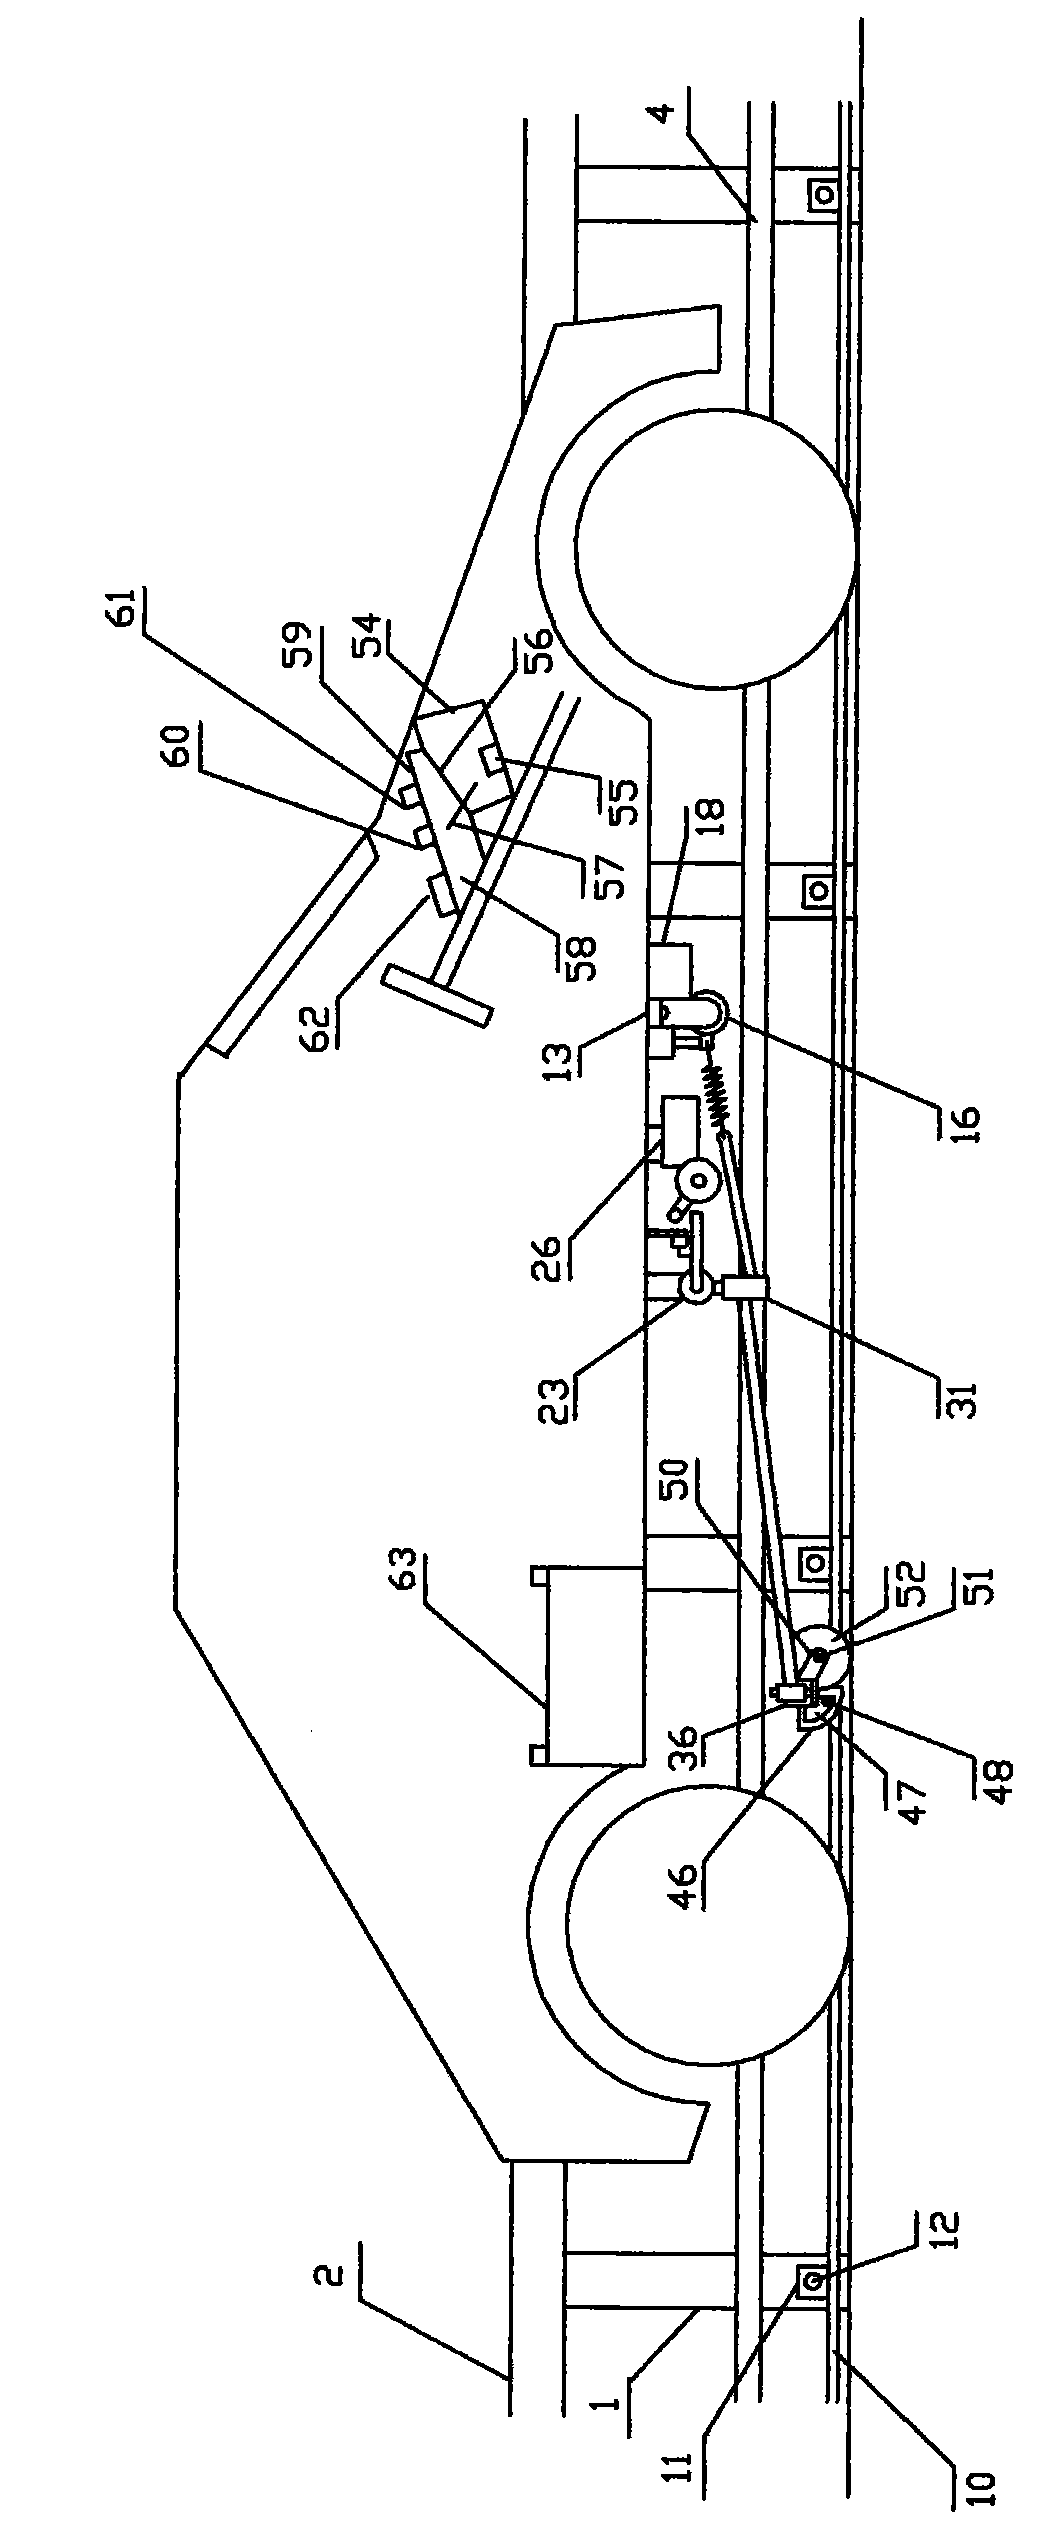 Automatic charging device for recessed electric rails of electric vehicle driven on highway